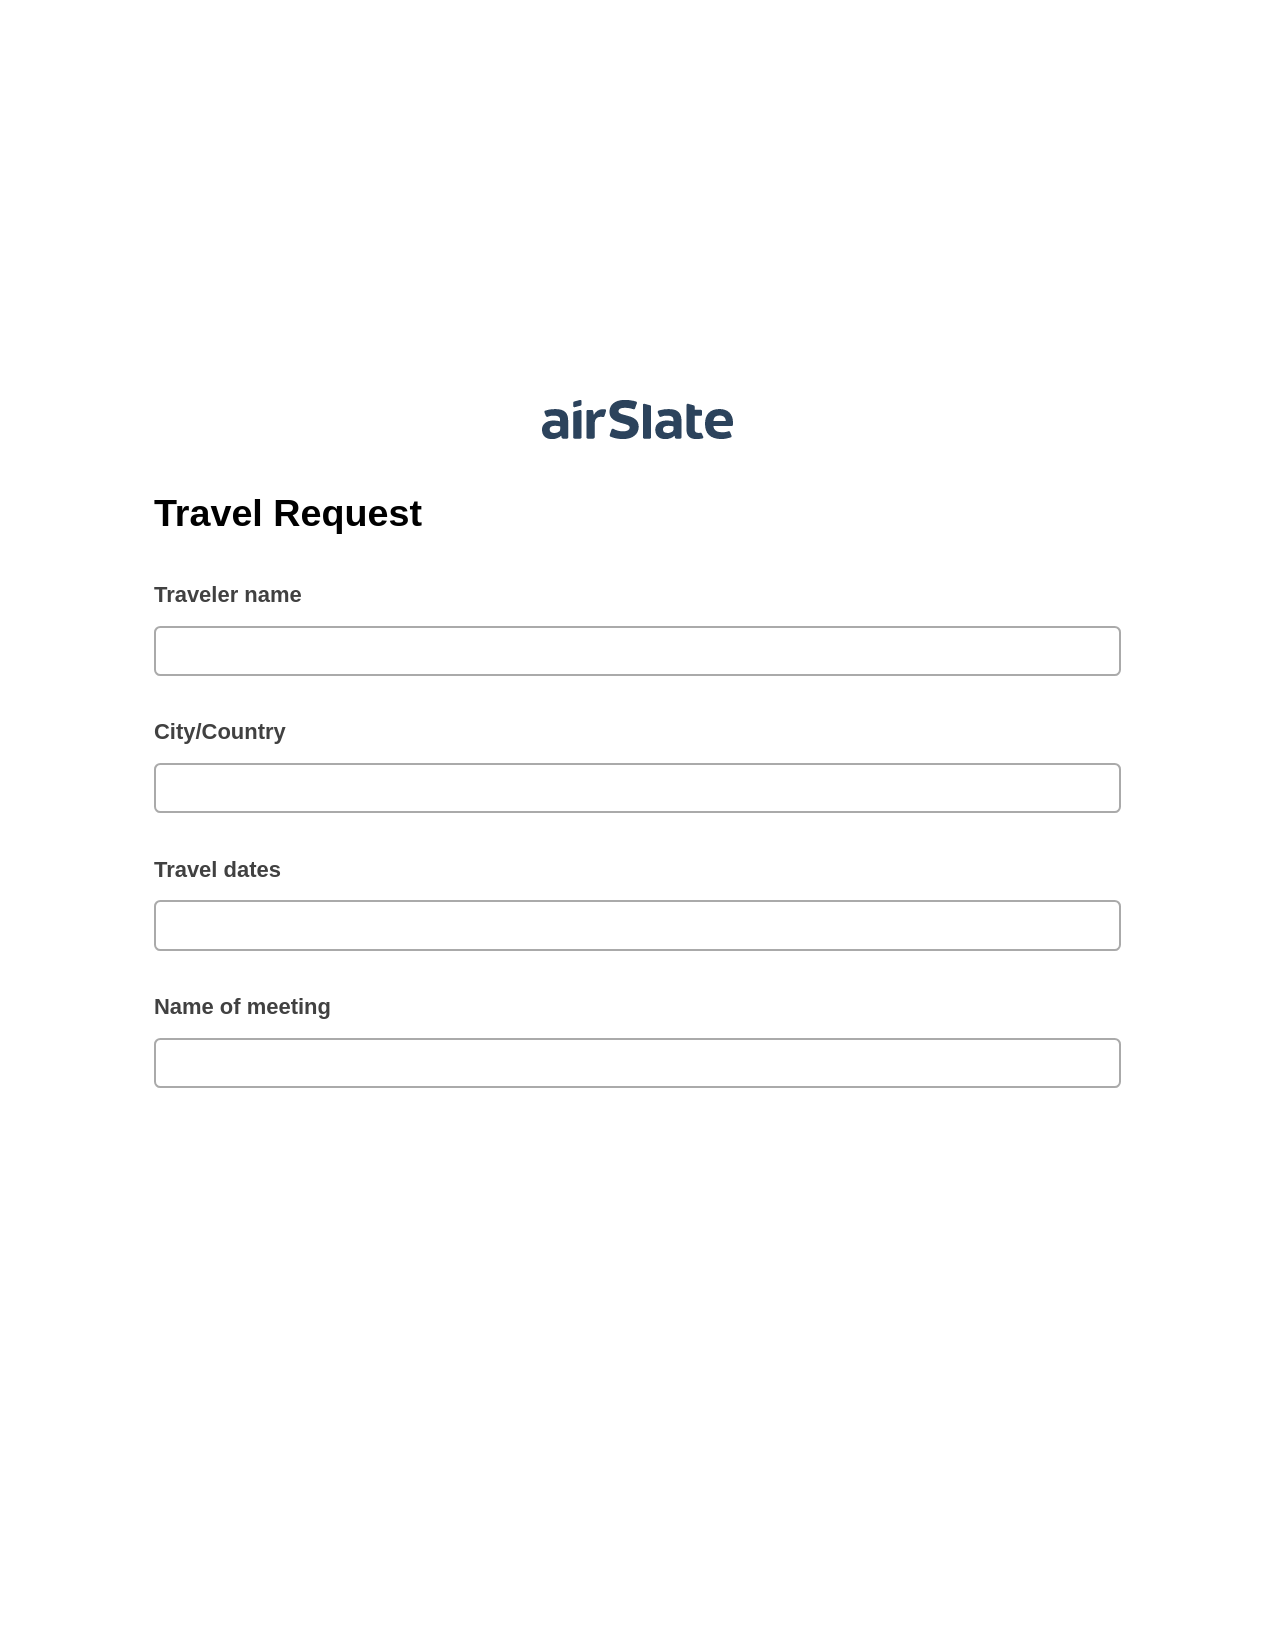 Travel Request Pre-fill from Salesforce Record Bot, Create slate addon, Export to Formstack Documents Bot